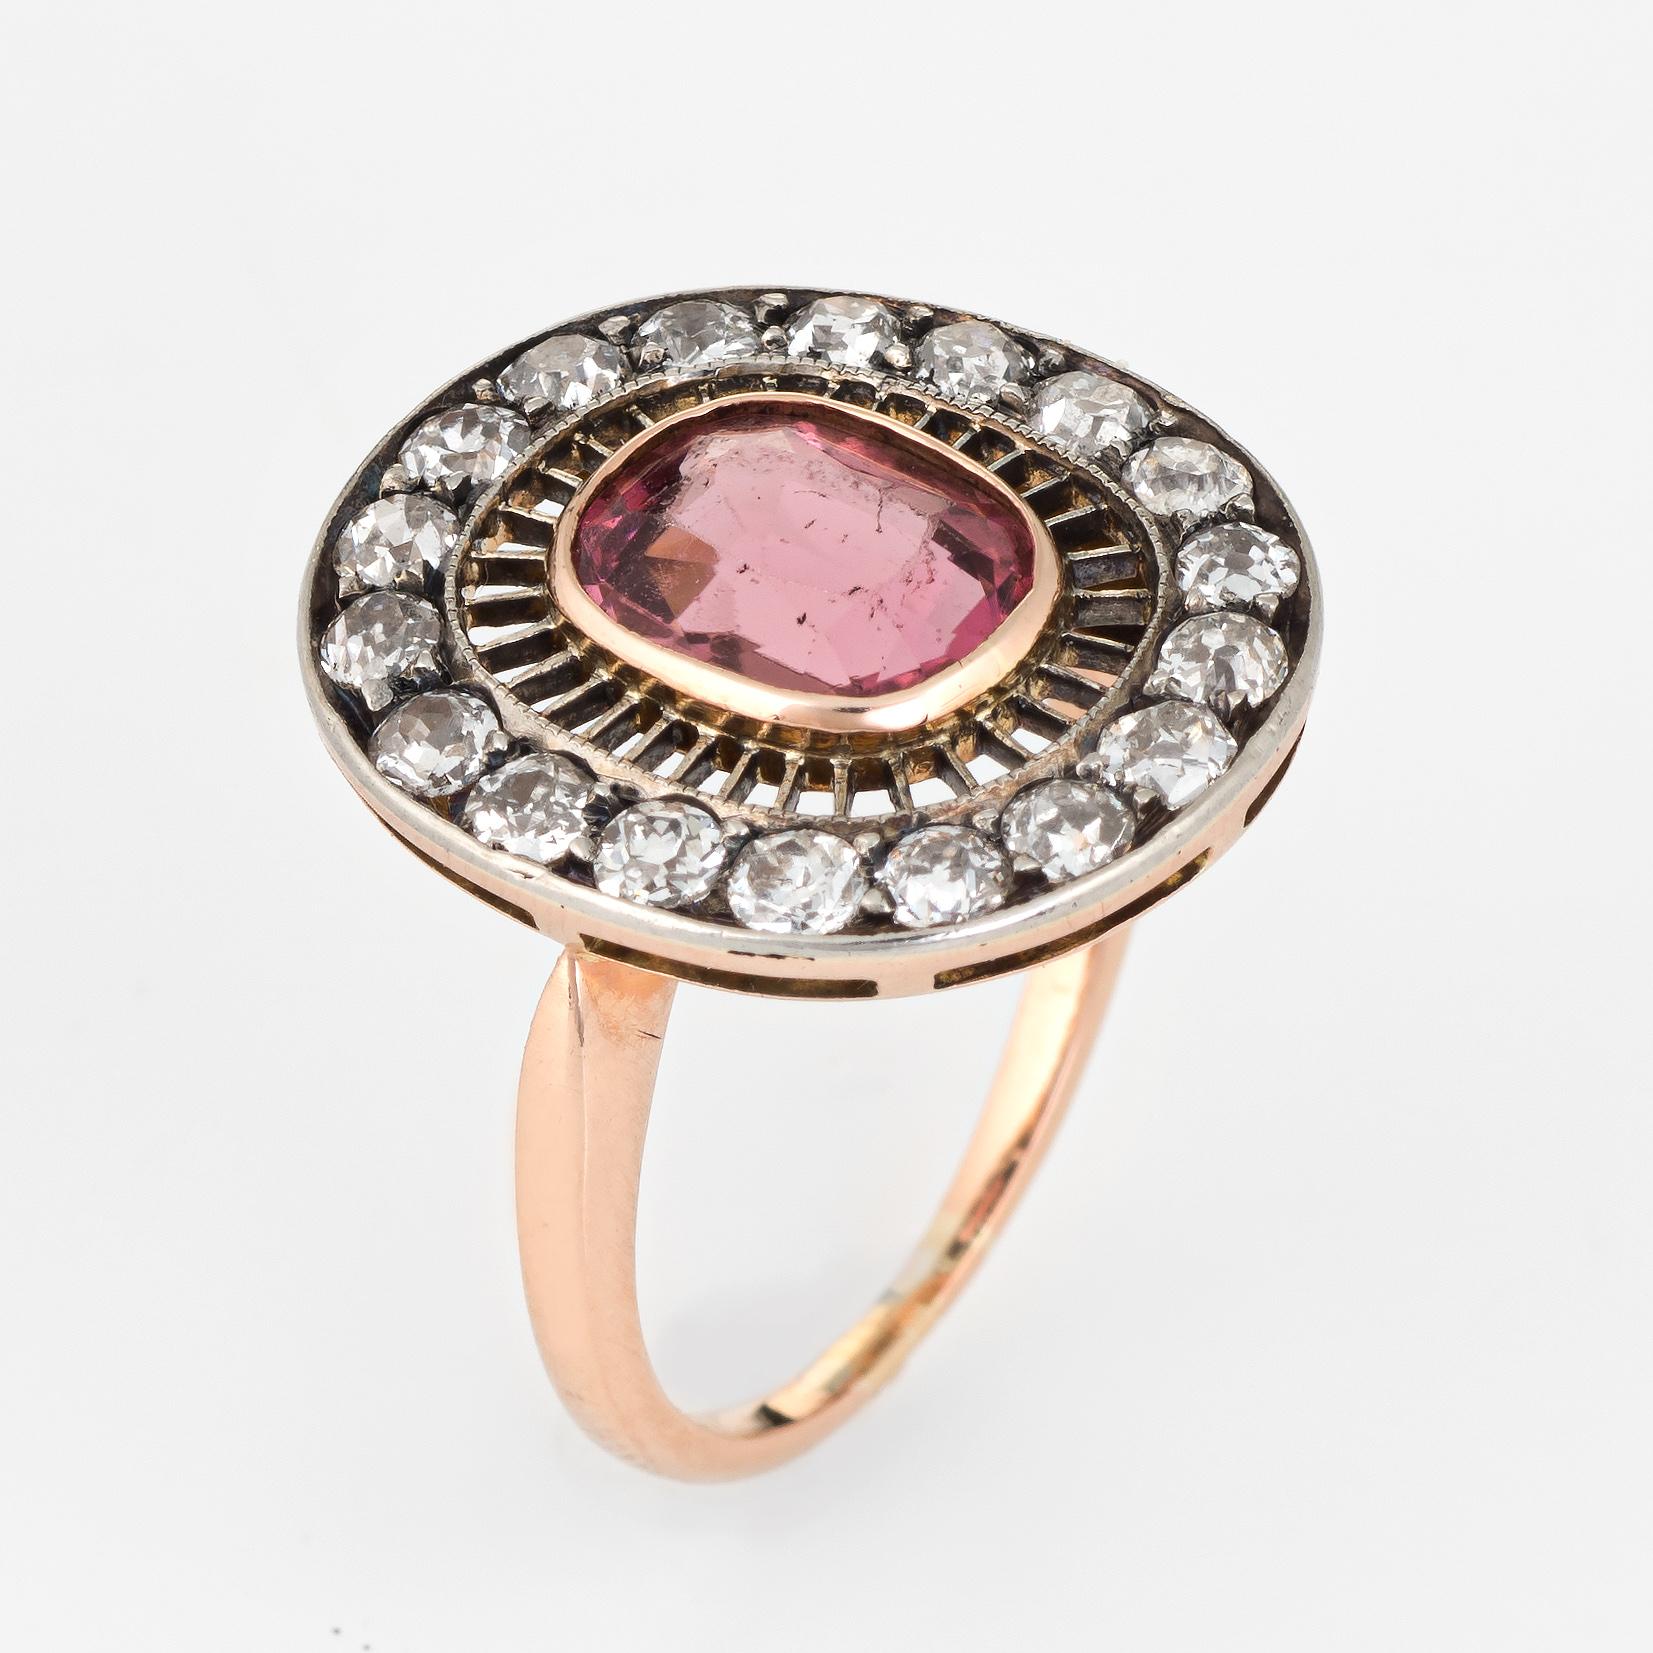 Finely detailed handmade antique Edwardian era pink tourmaline & diamond cocktail ring, crafted in 14 karat rose and white gold. 

One cushion shaped mixed cut tourmaline approx. 2.10 carats (measures 9mm x 7.5mm x 4.35mm), medium pink color, nearly